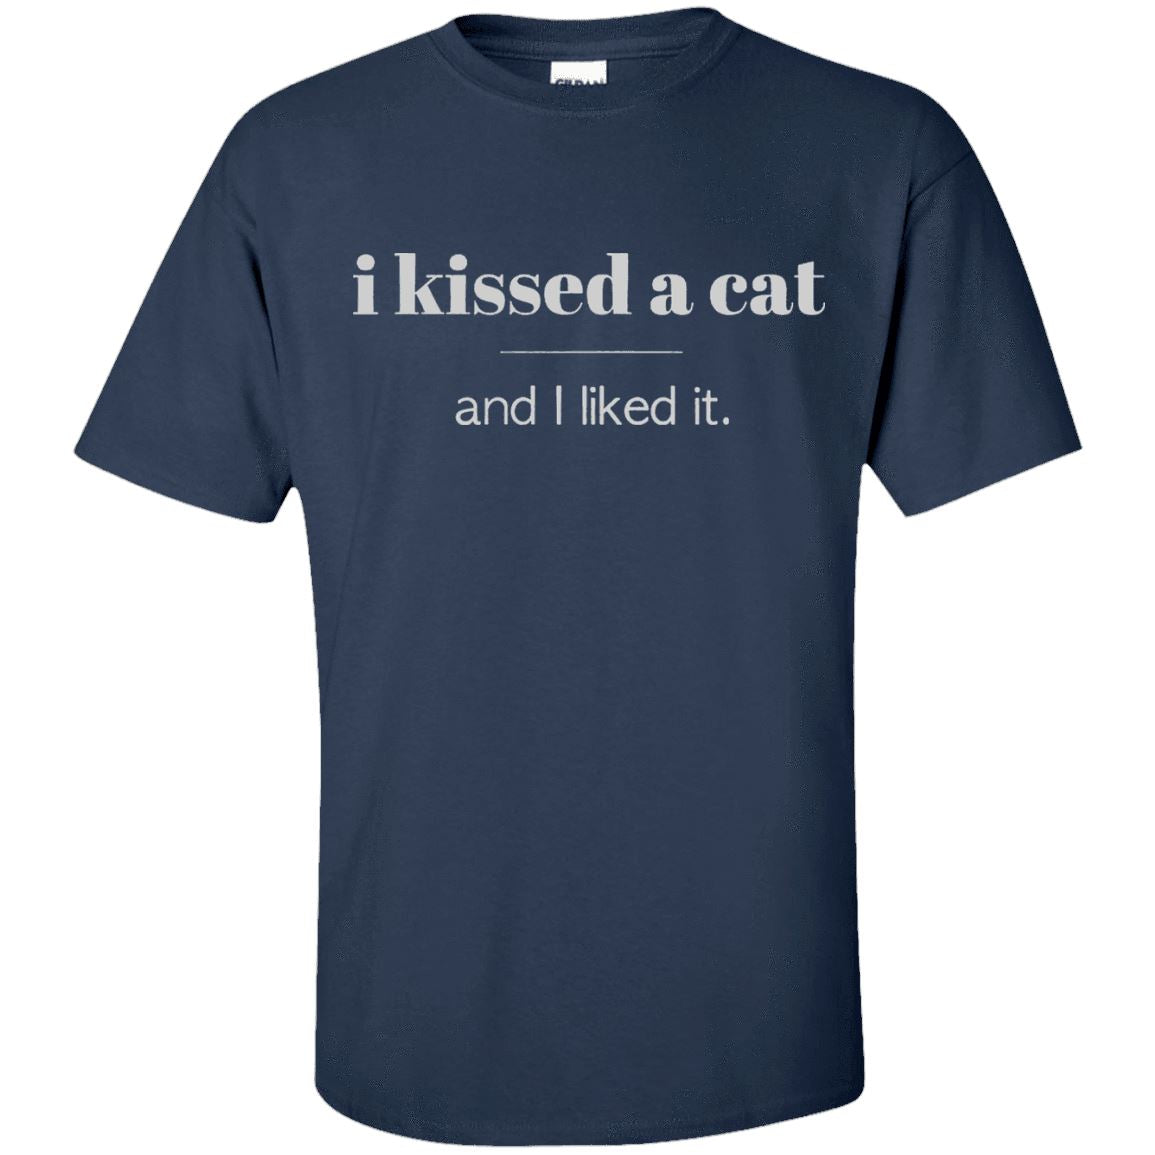 Cat Tee - I Kissed A Cat & I Liked It (SALES) - CatsForLife